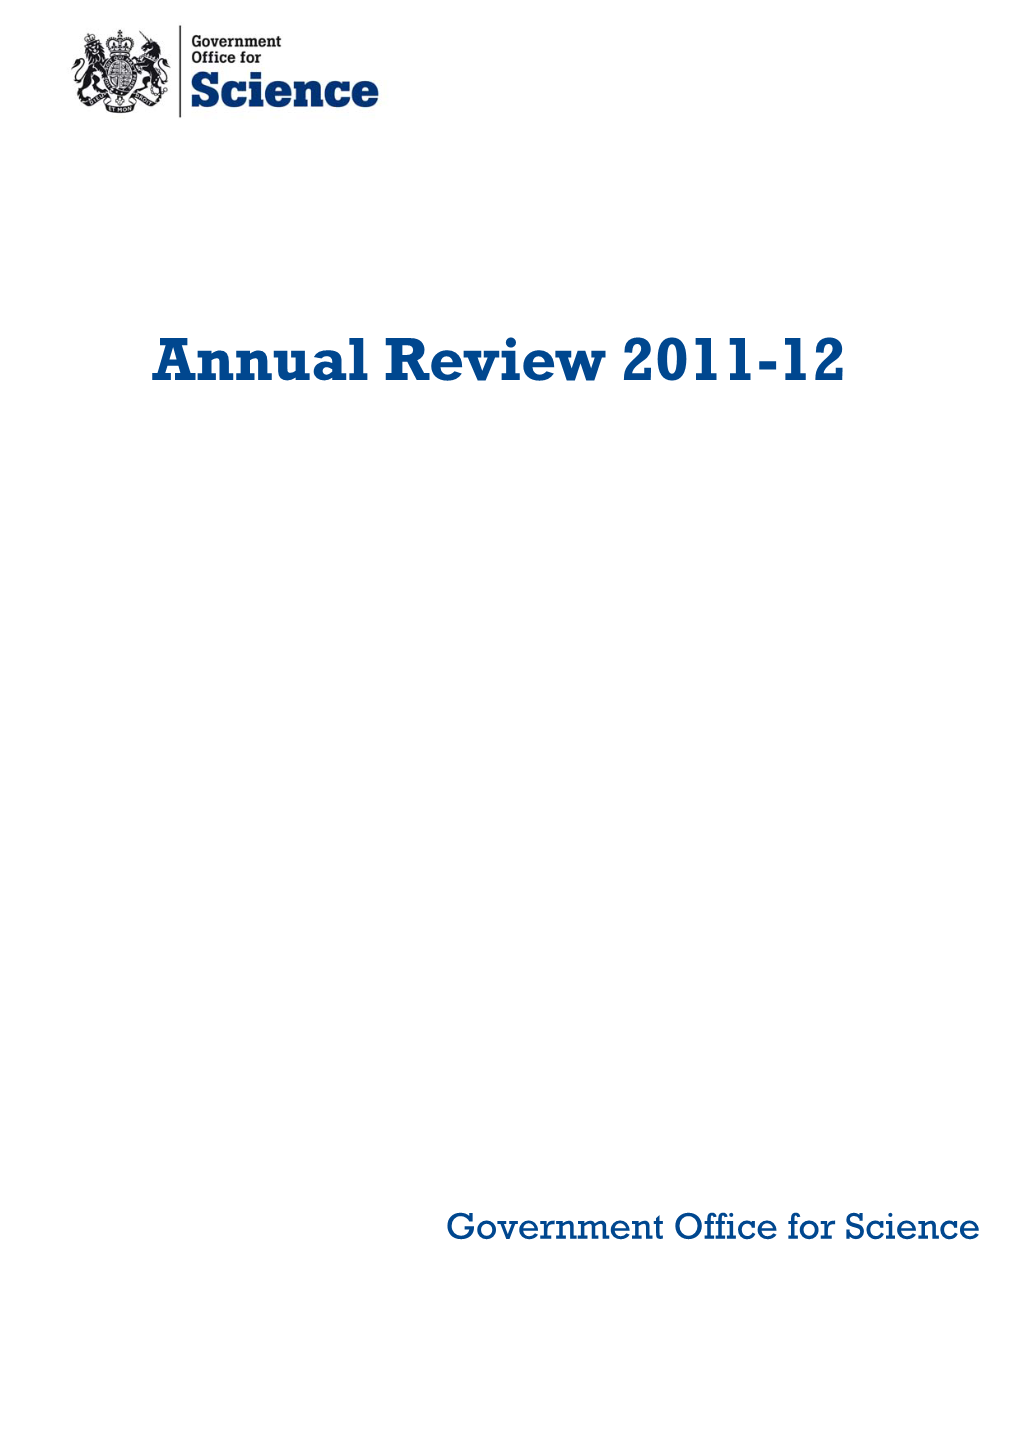 Government Office for Science Annual Review 2011-12